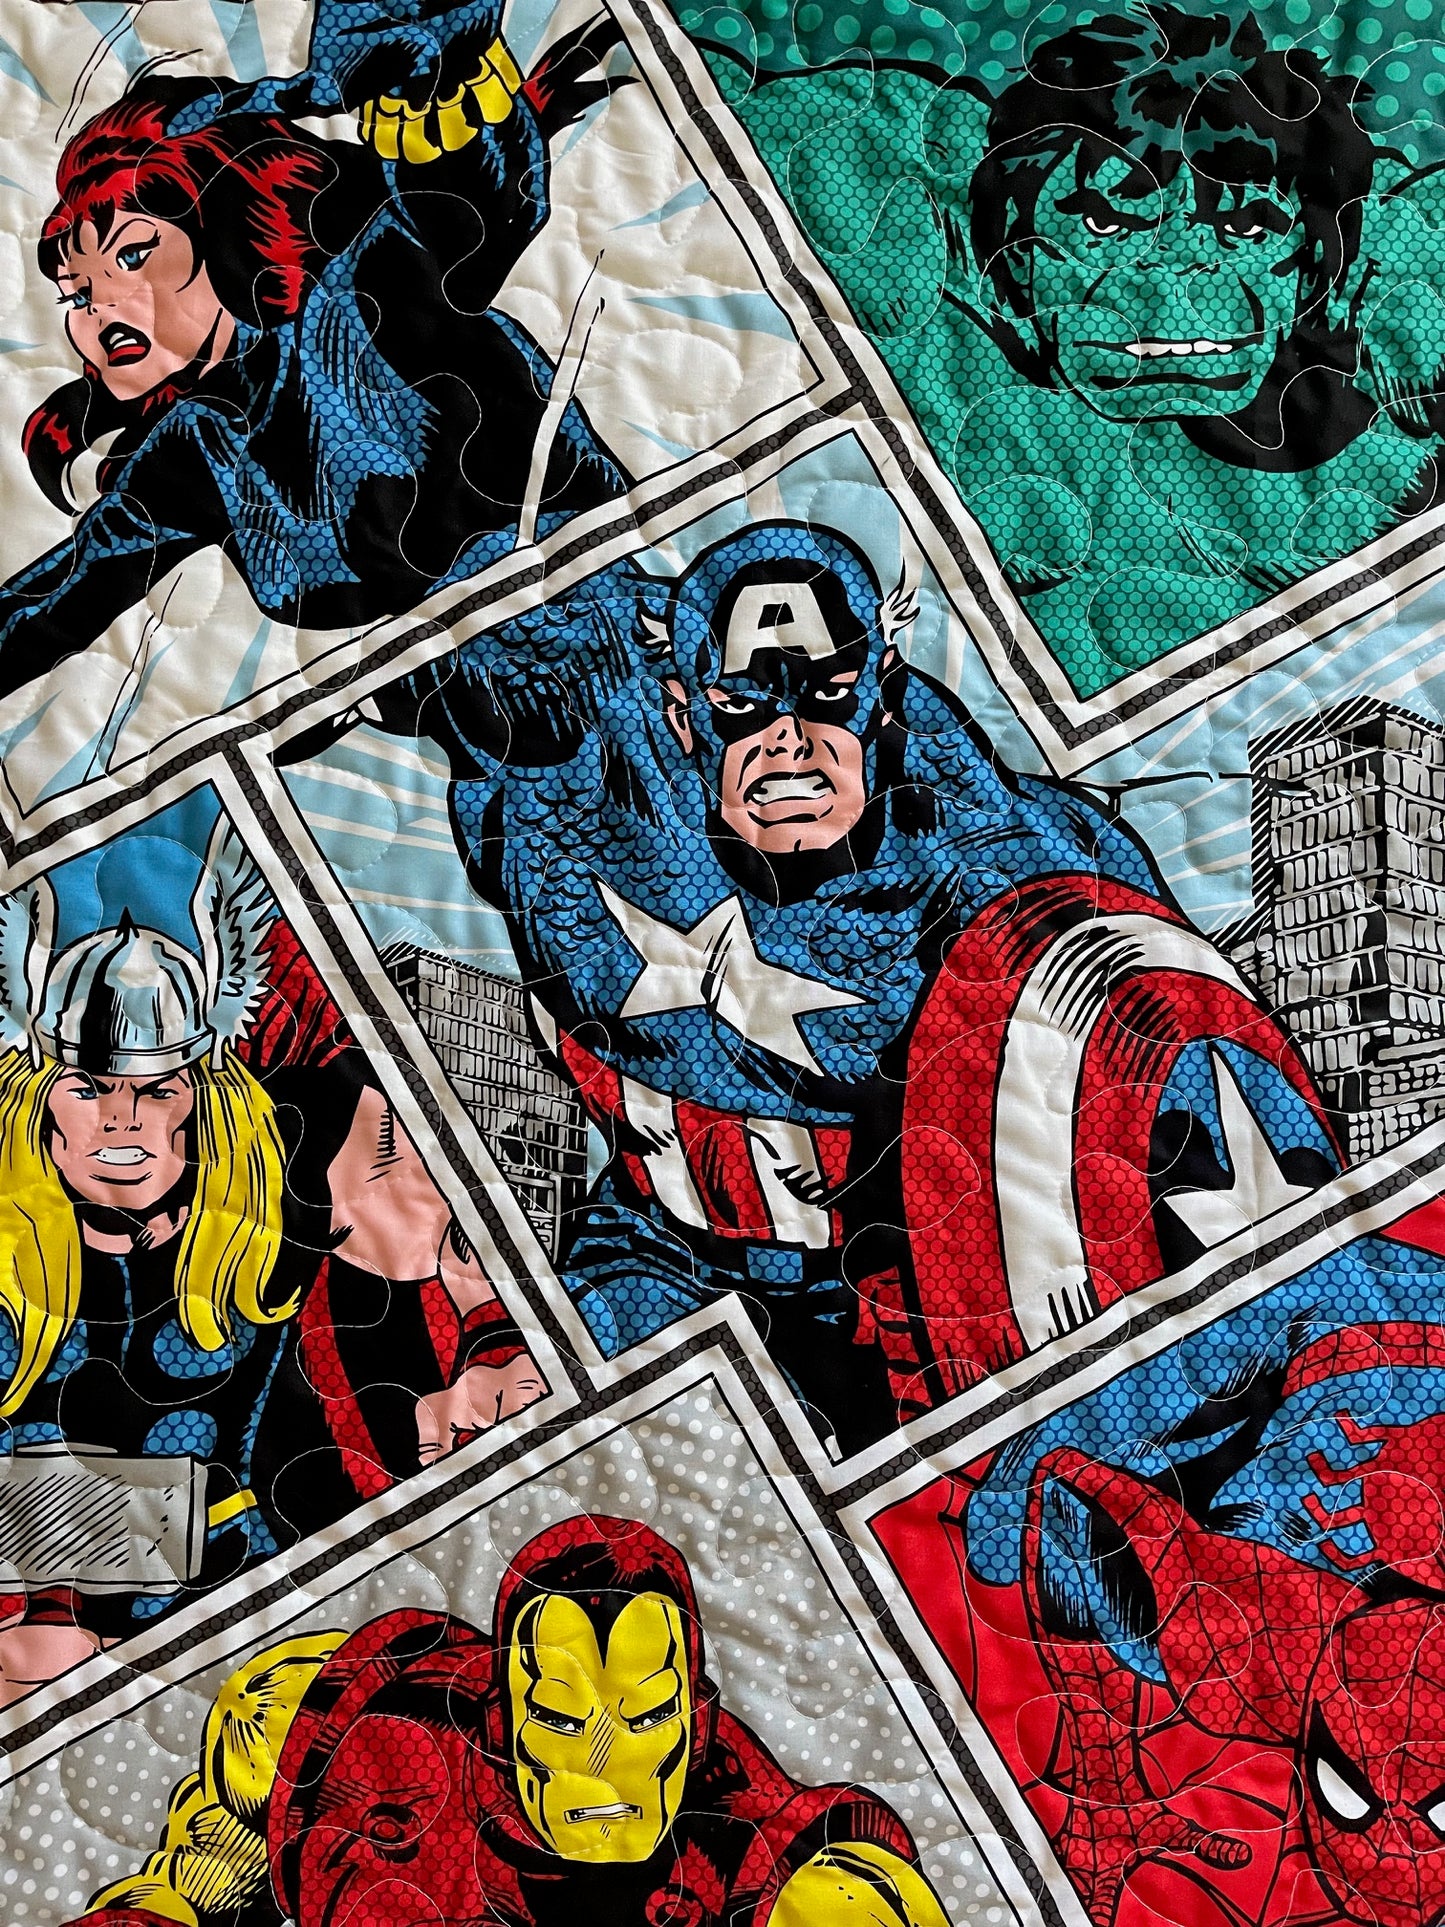 MARVEL SUPERHEROES AVENGERS BLACK WIDOW, SPIDER MAN, THOR, THE HULK, IRON MAN, CAPTAIN AMERICA Inspired Quilted Blanket Soft Flannel Backing